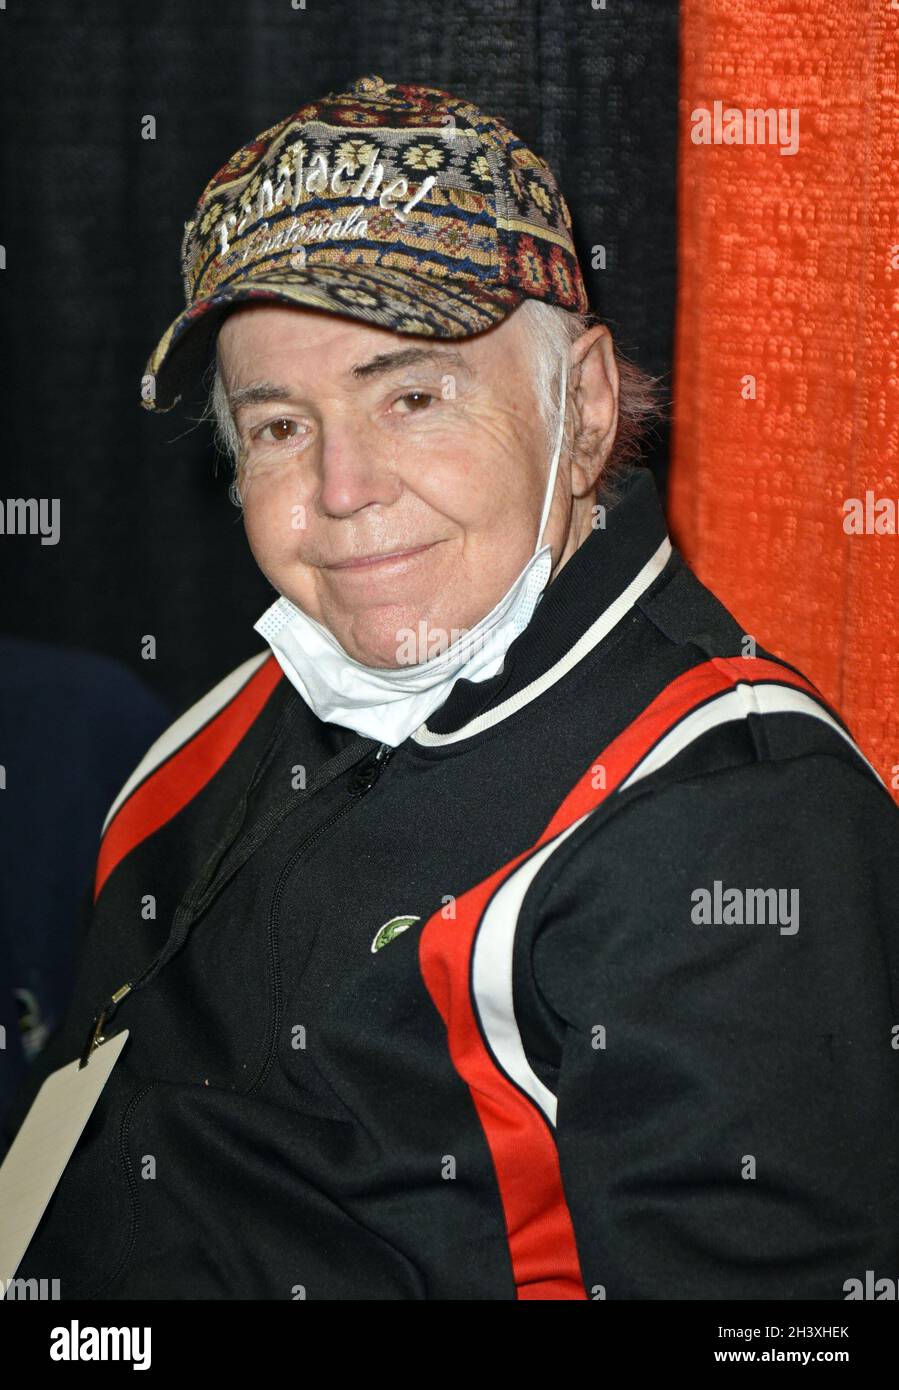 Knoxville, TN, USA. 29th Oct, 2021. Walter Koenig in attendance for FANBOY EXPO, Knoxville Convention Center, Knoxville, TN October 29, 2021. Credit: Derek Storm/Everett Collection/Alamy Live News Stock Photo